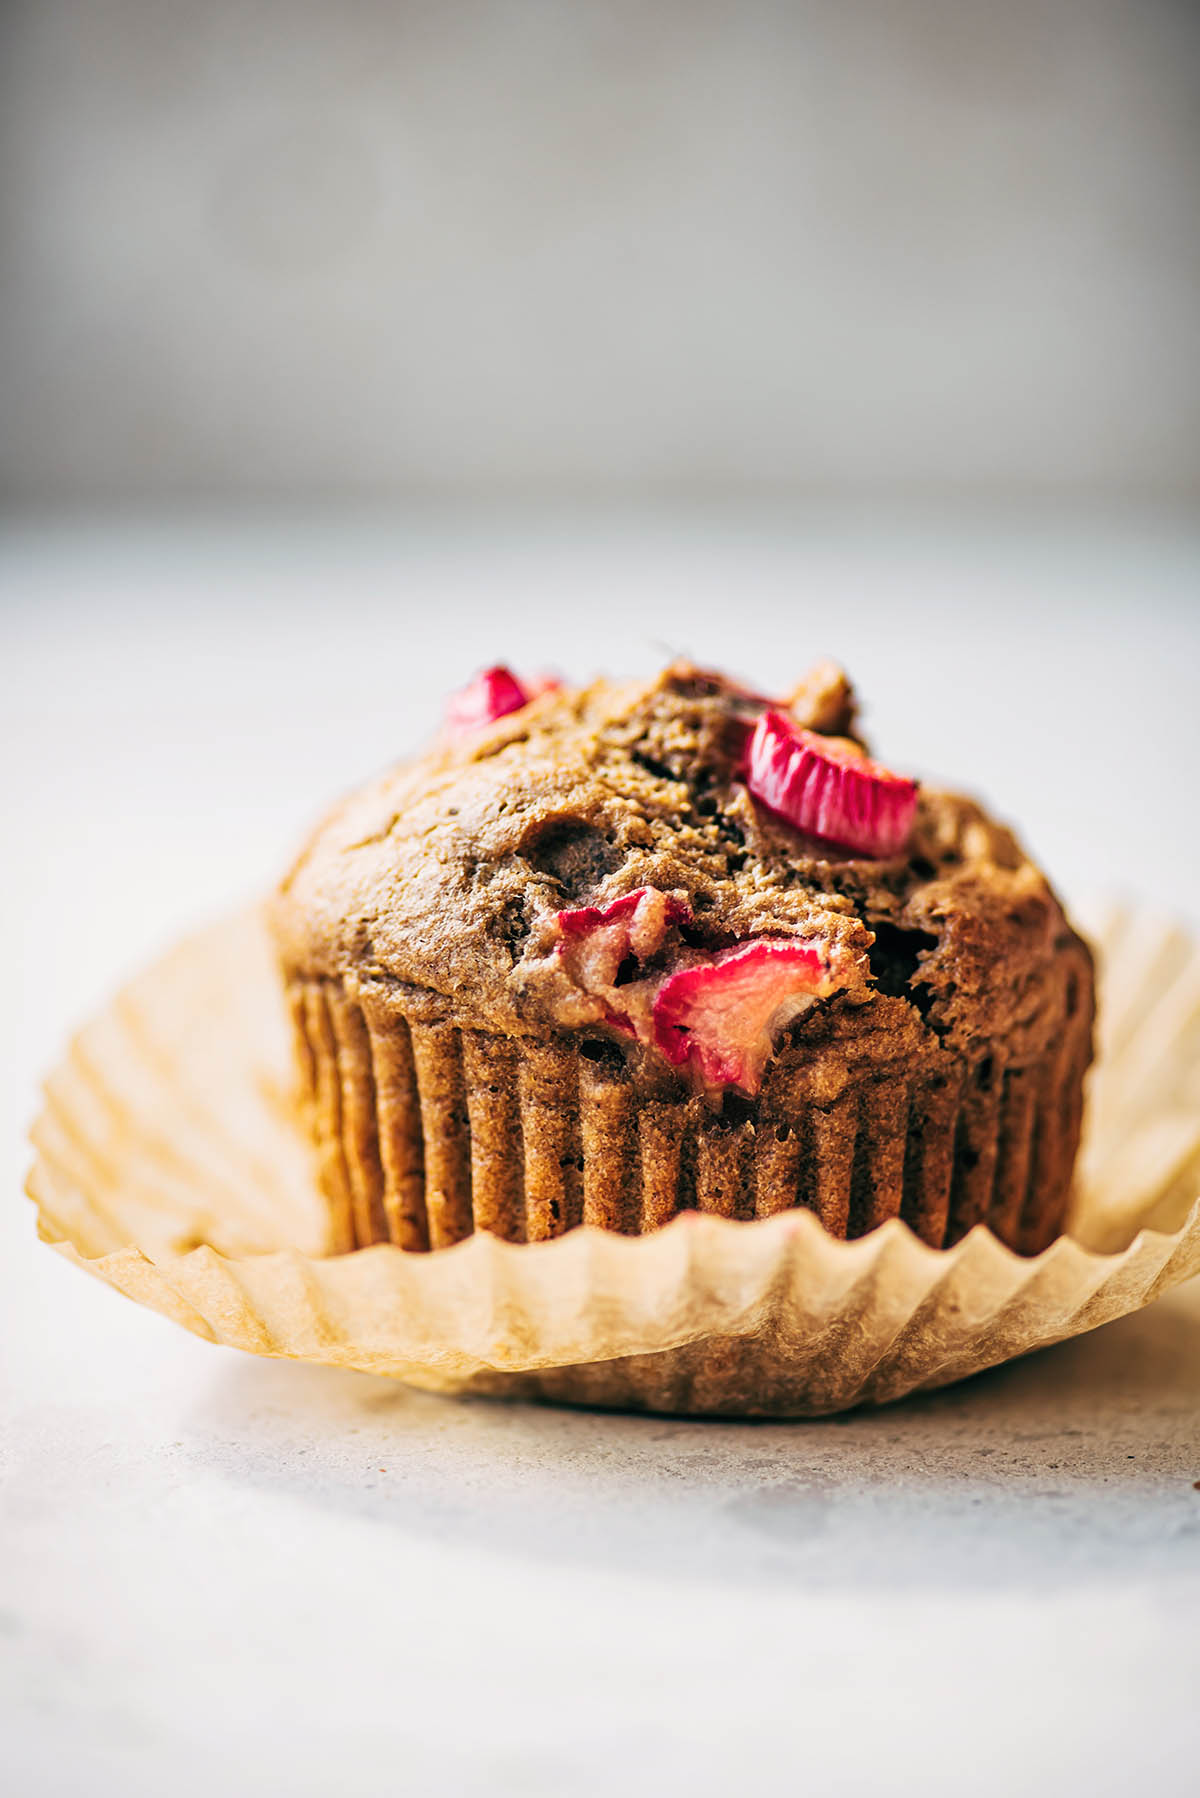 Muffin topped with rhubarb in a paper liner.